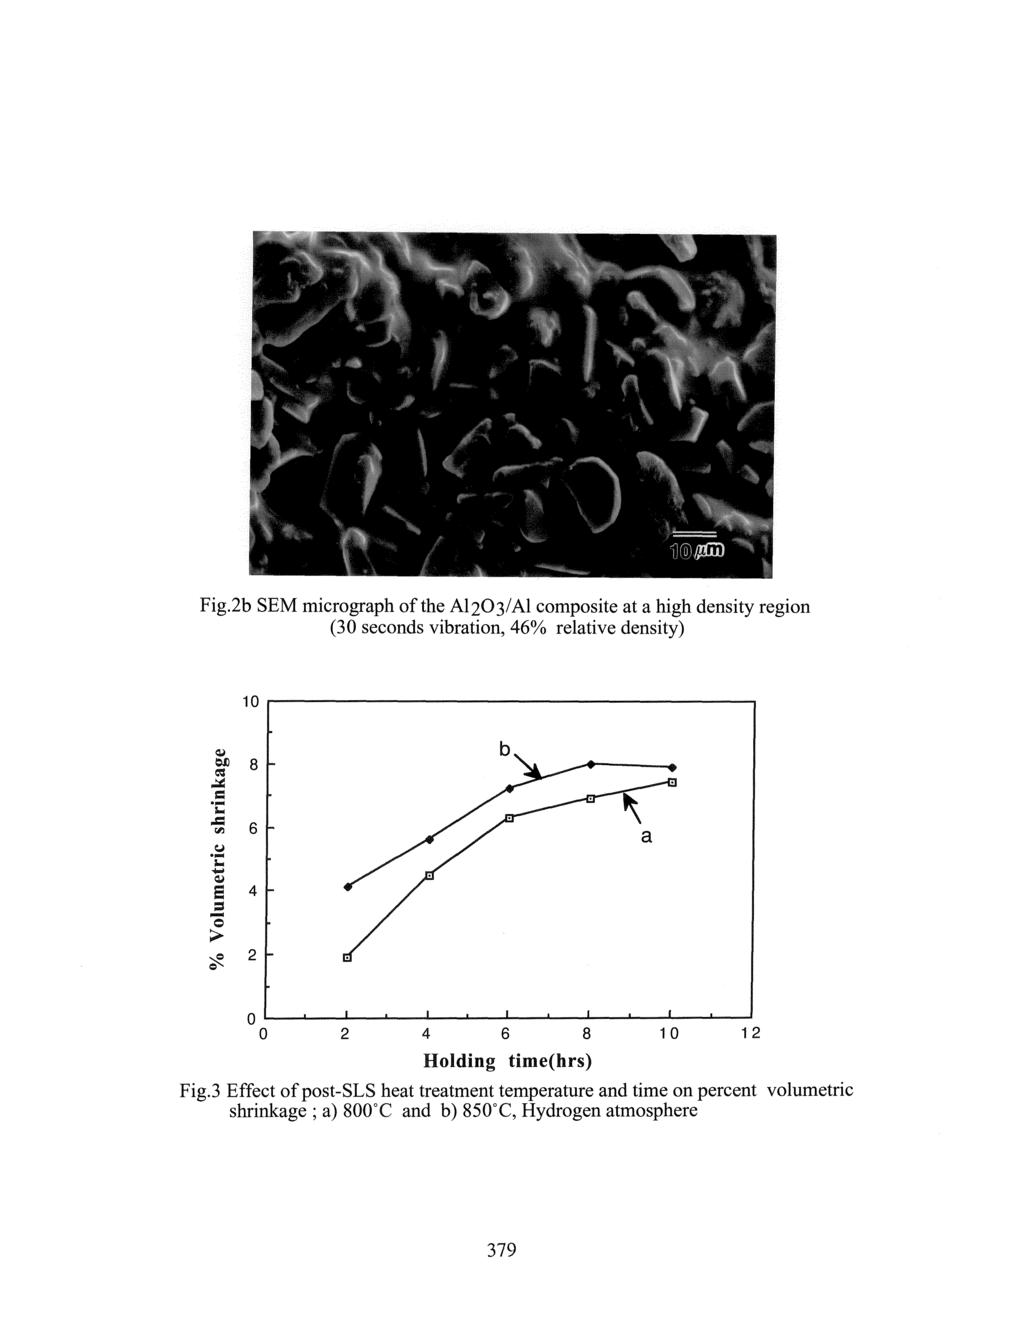 Fig.2b SEM micrograph ofthe A1203/AI composite at a high density region (30 seconds vibration, 46%